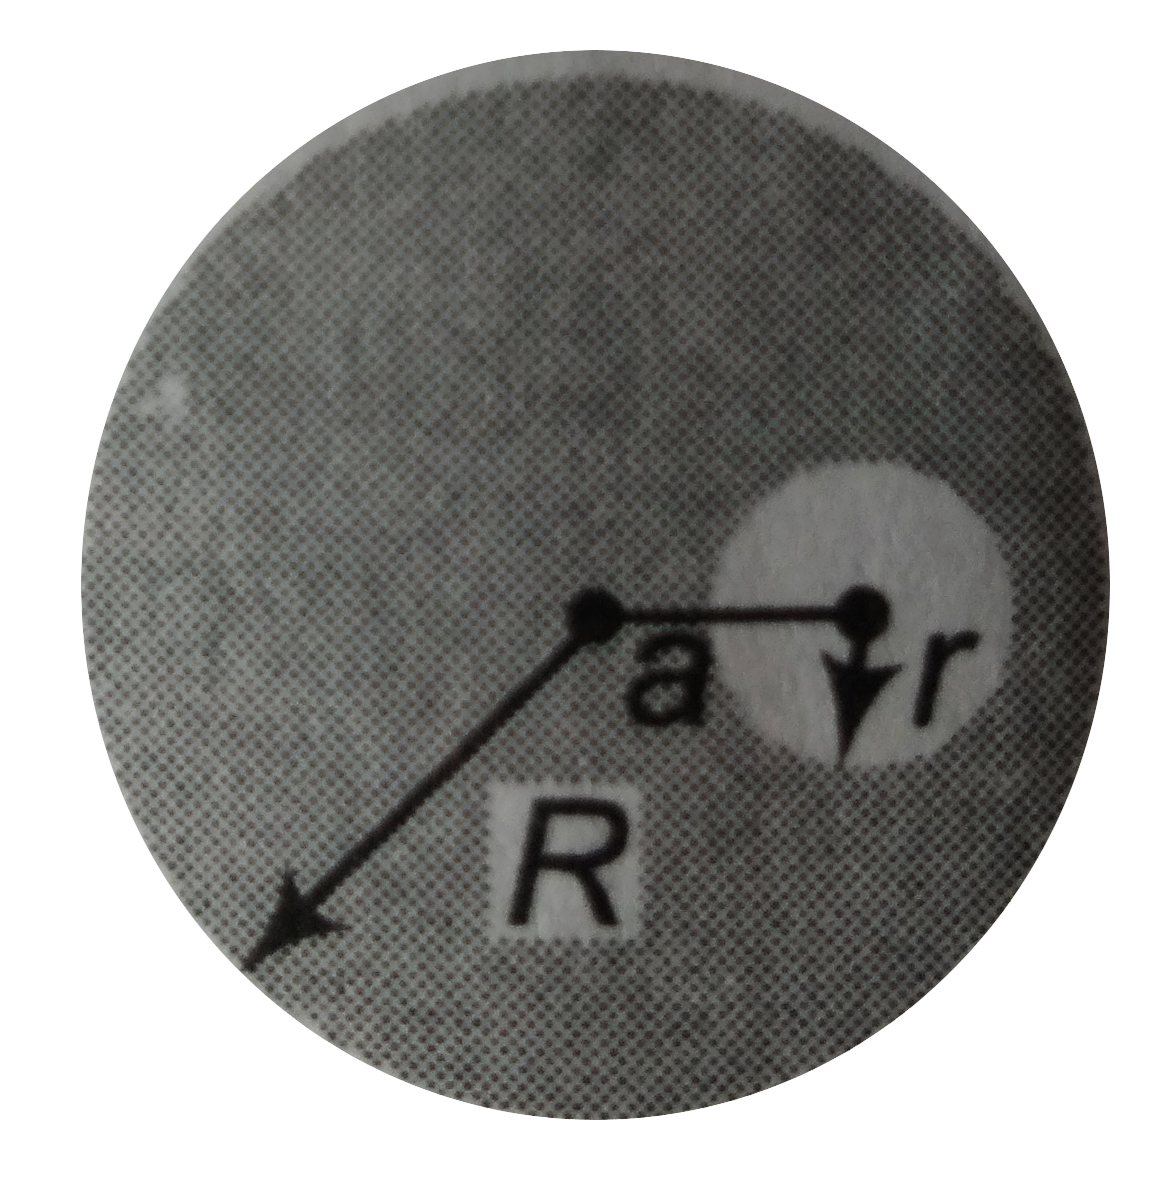 The figure represents a solid uniform sphere of mass M and radius R. A spherical cavity of radius r is at a distance a from the centre of the sphere. The gravitational field inside the cavity is